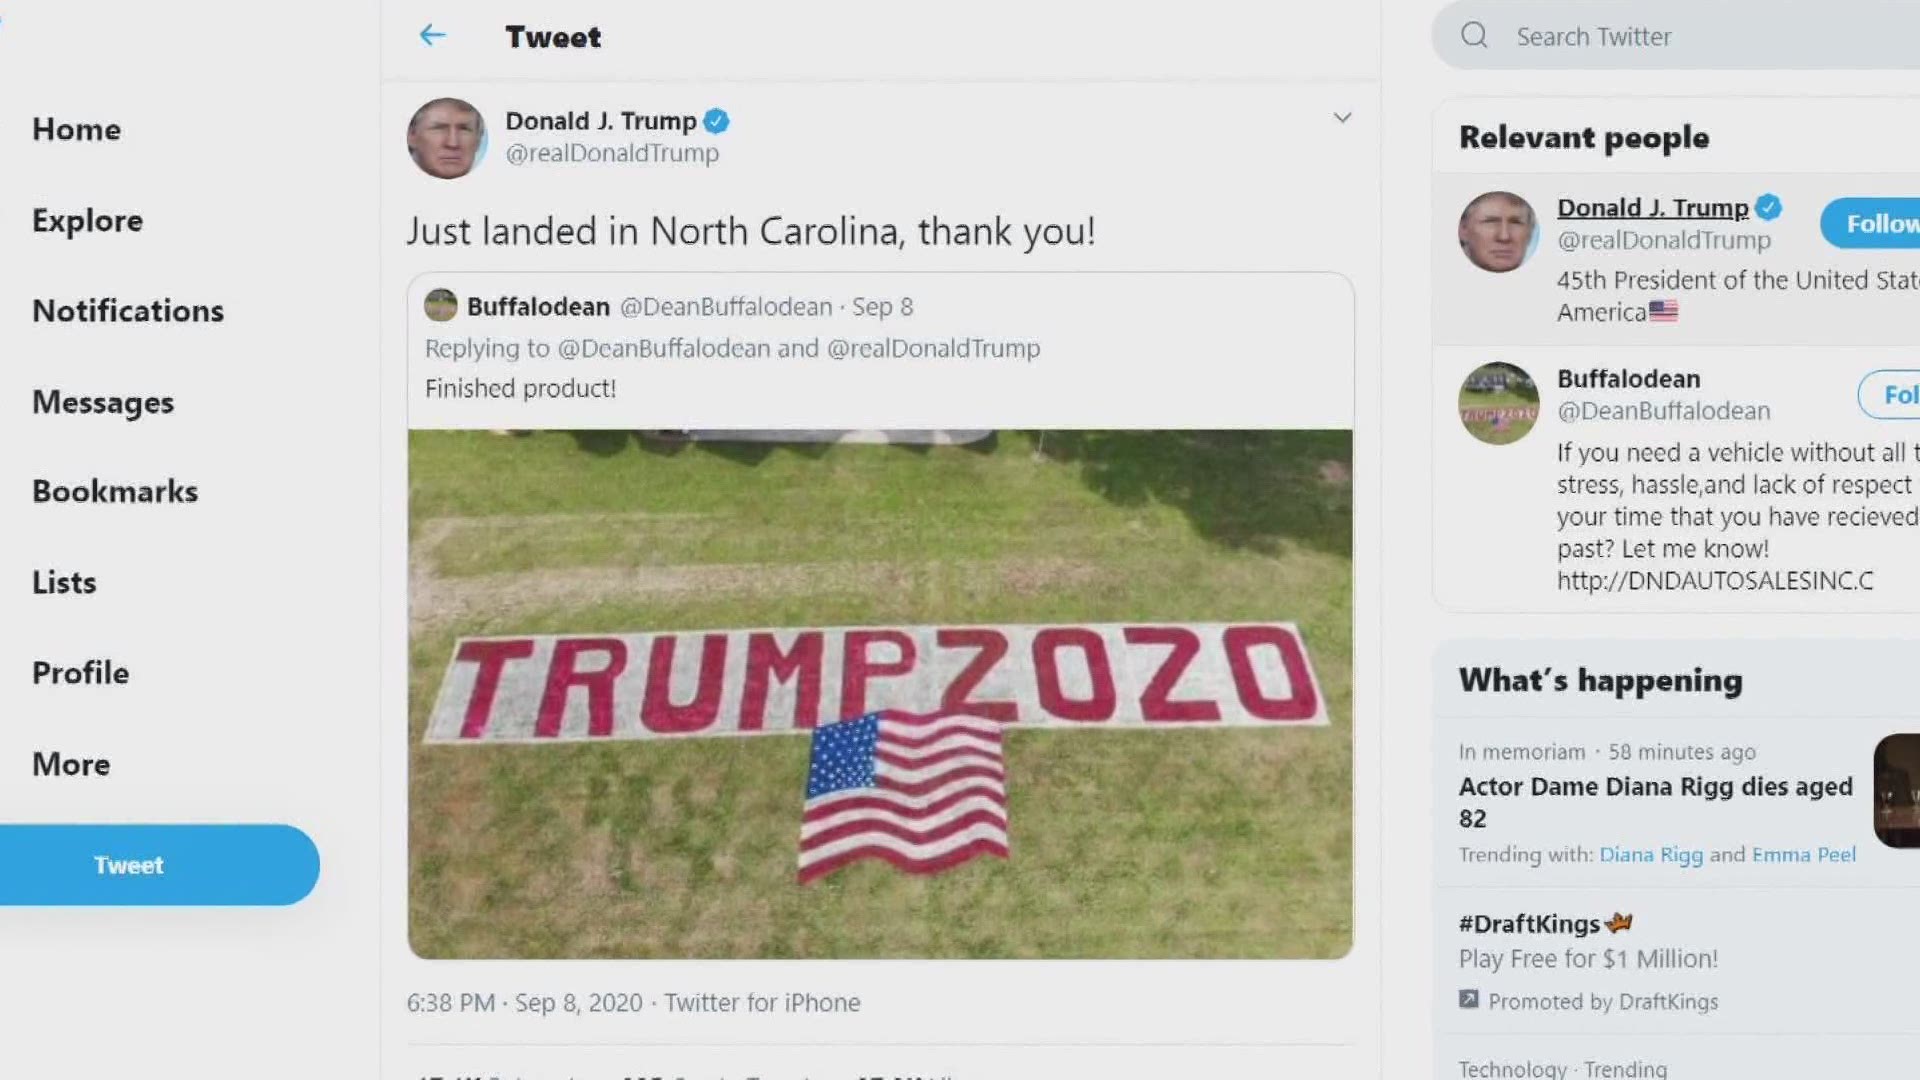 Rob Wilson said he was not expecting President Trump to share a photo of his yard sign, which says "Trump 2020."